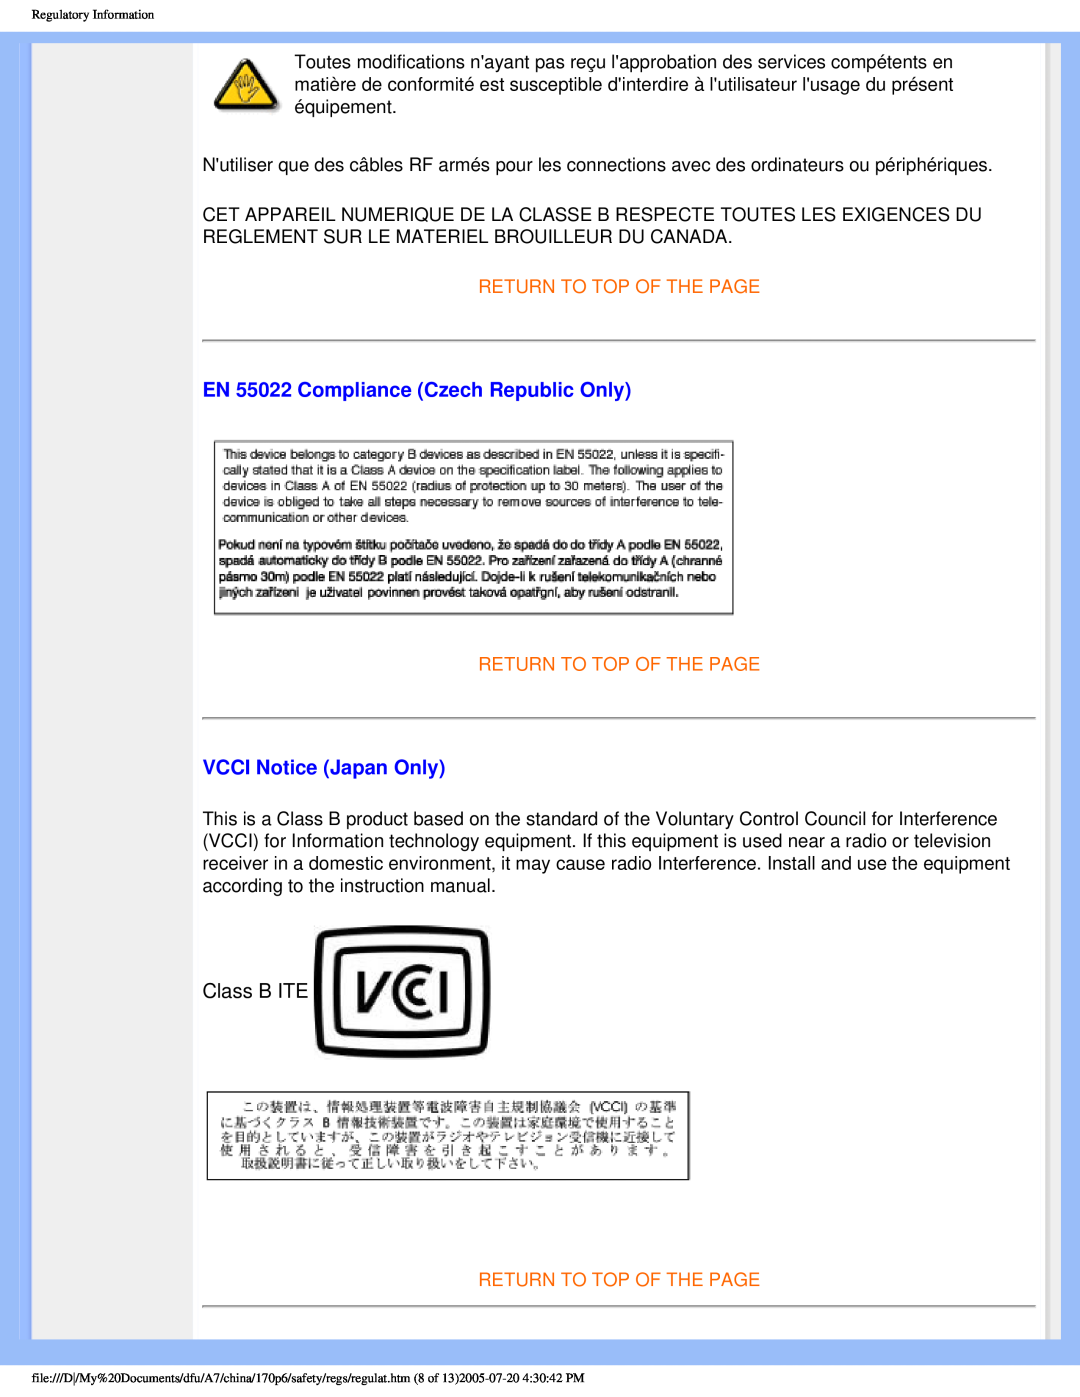 Philips 170p6 user manual EN 55022 Compliance Czech Republic Only, VCCI Notice Japan Only, Return To Top Of The Page 